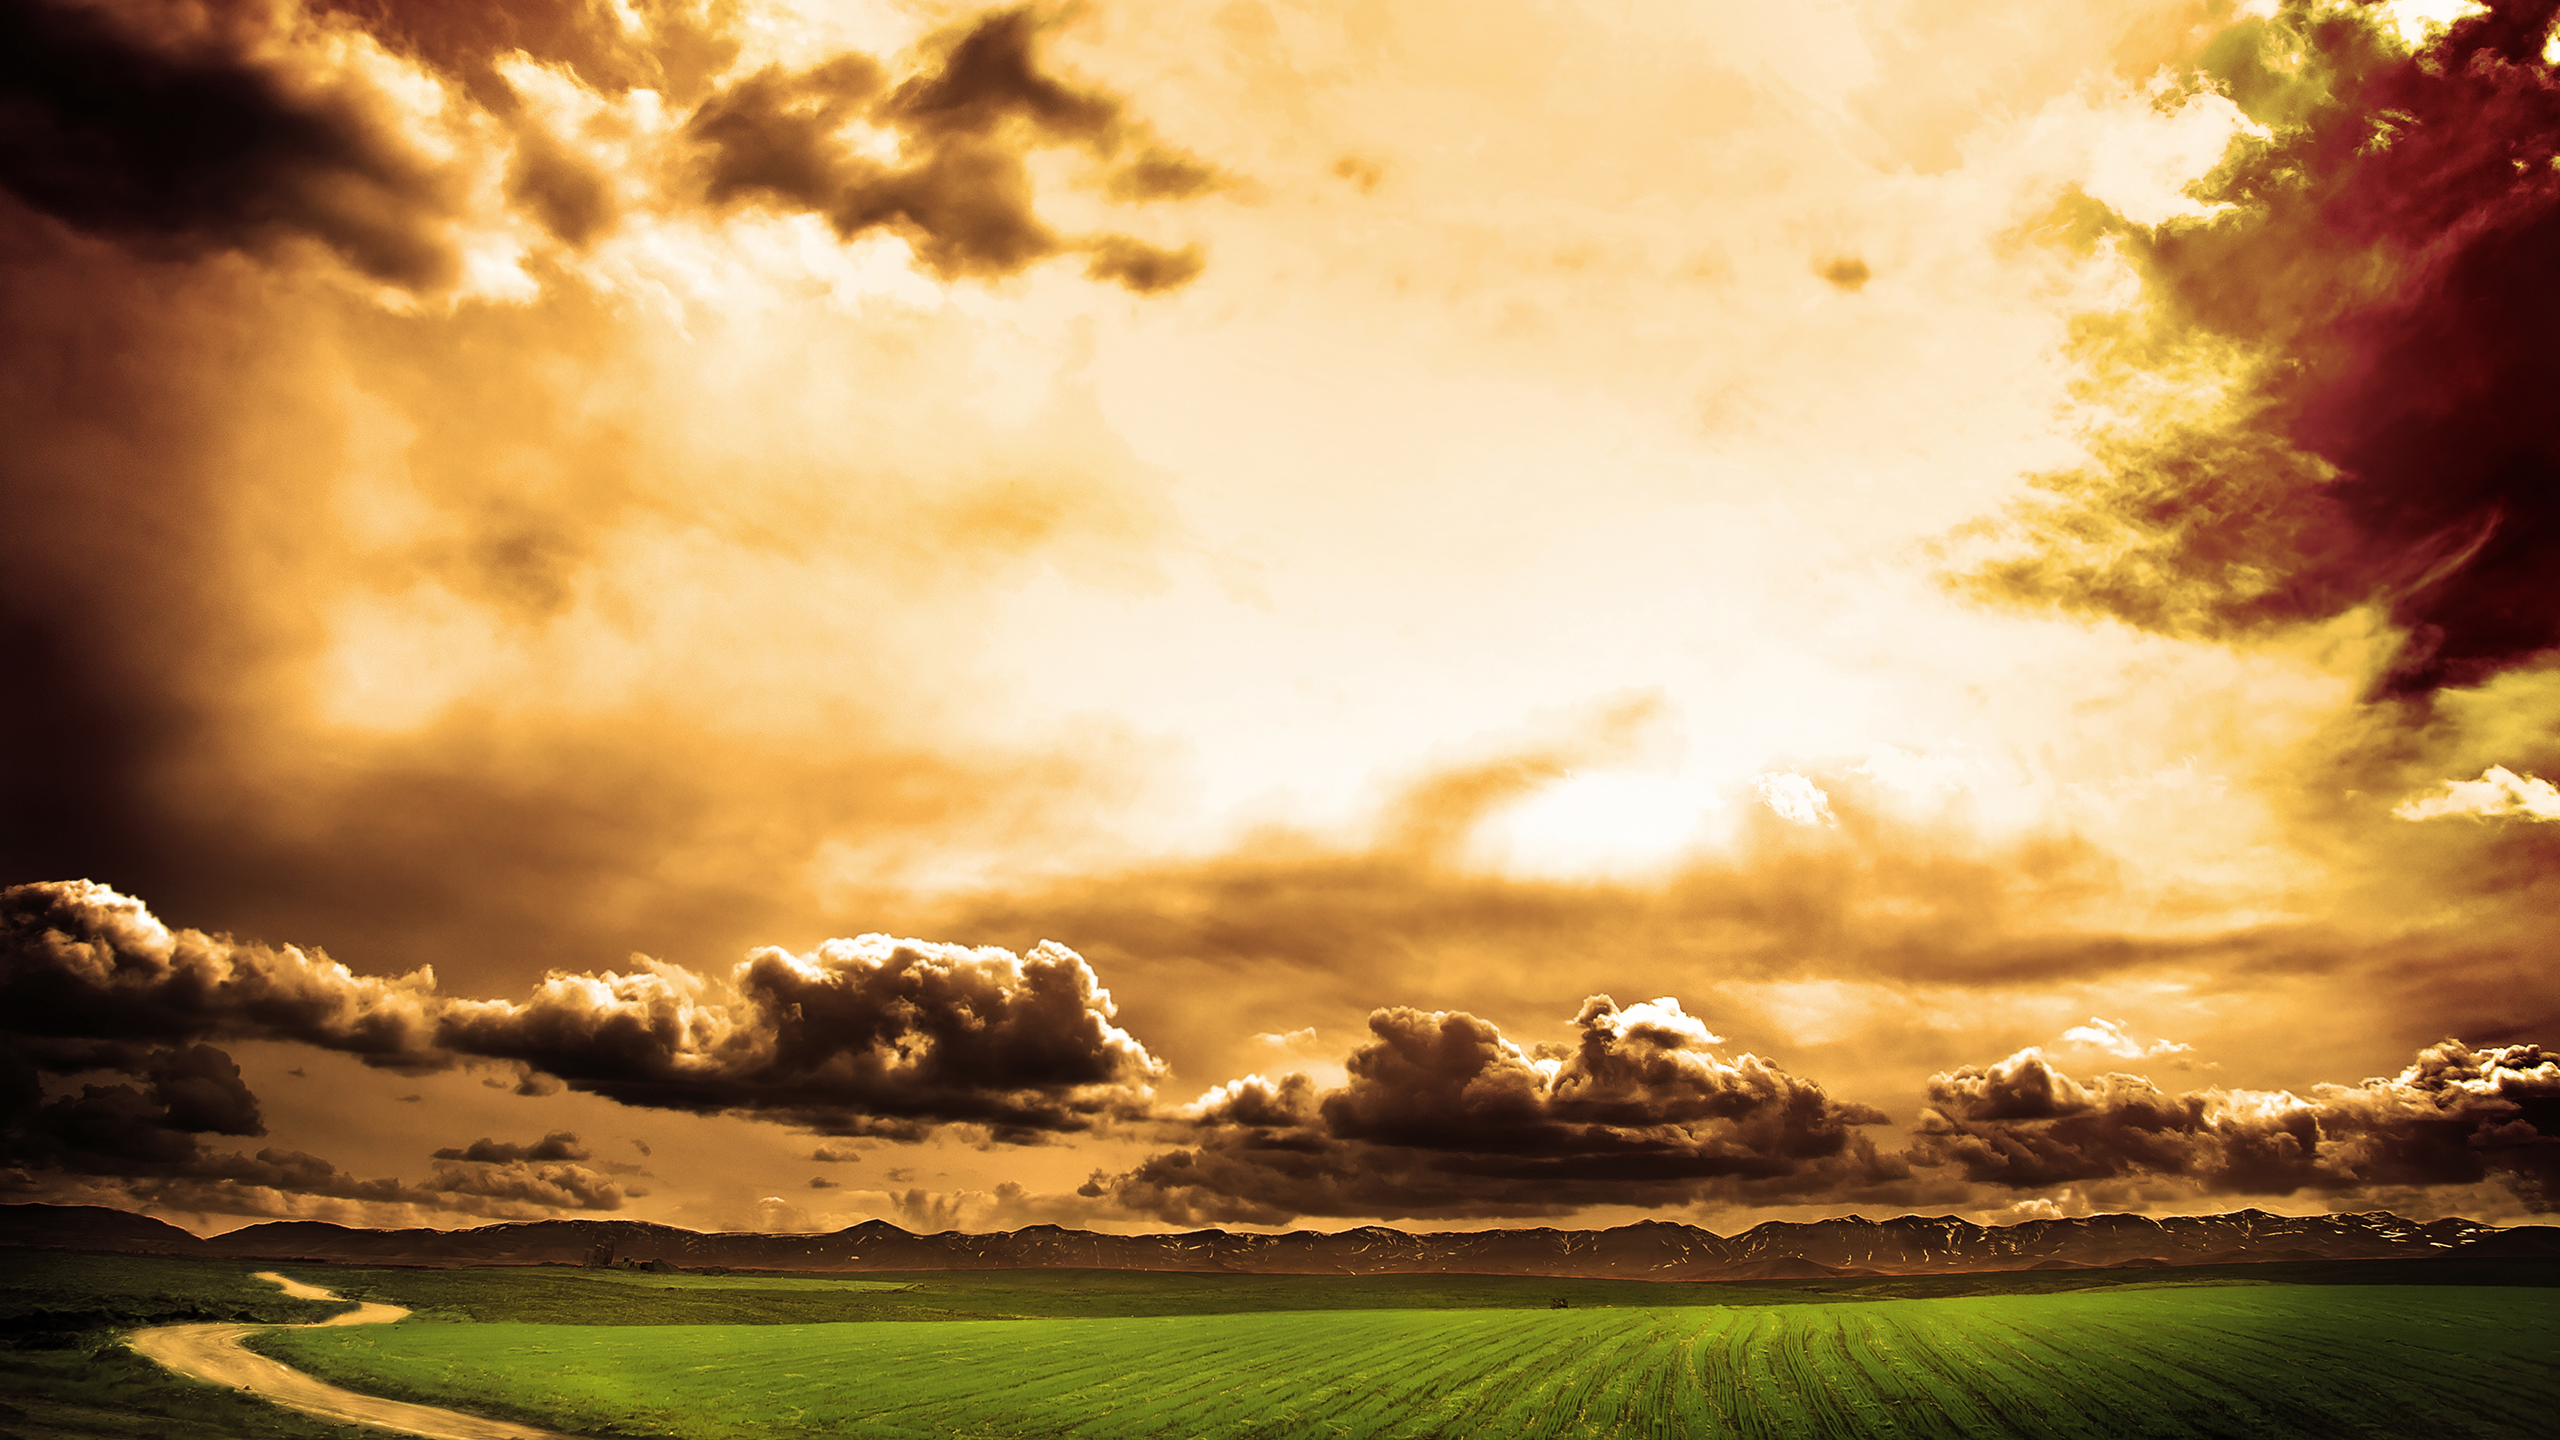 General 2560x1440 nature field sky clouds sunlight outdoors